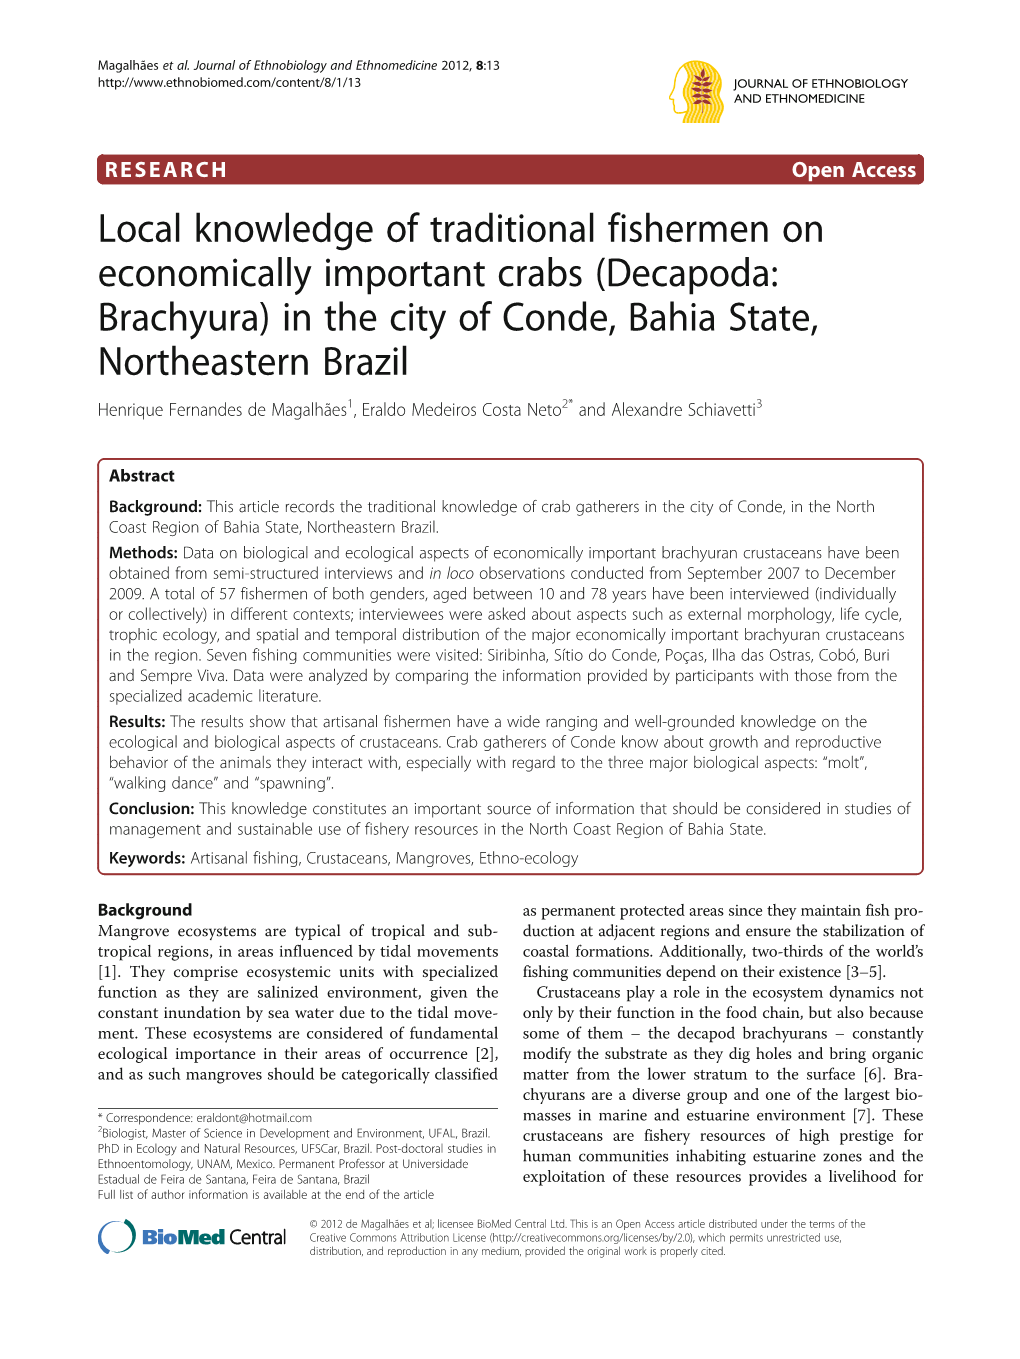 Local Knowledge of Traditional Fishermen on Economically Important Crabs (Decapoda: Brachyura) in the City of Conde, Bahia State